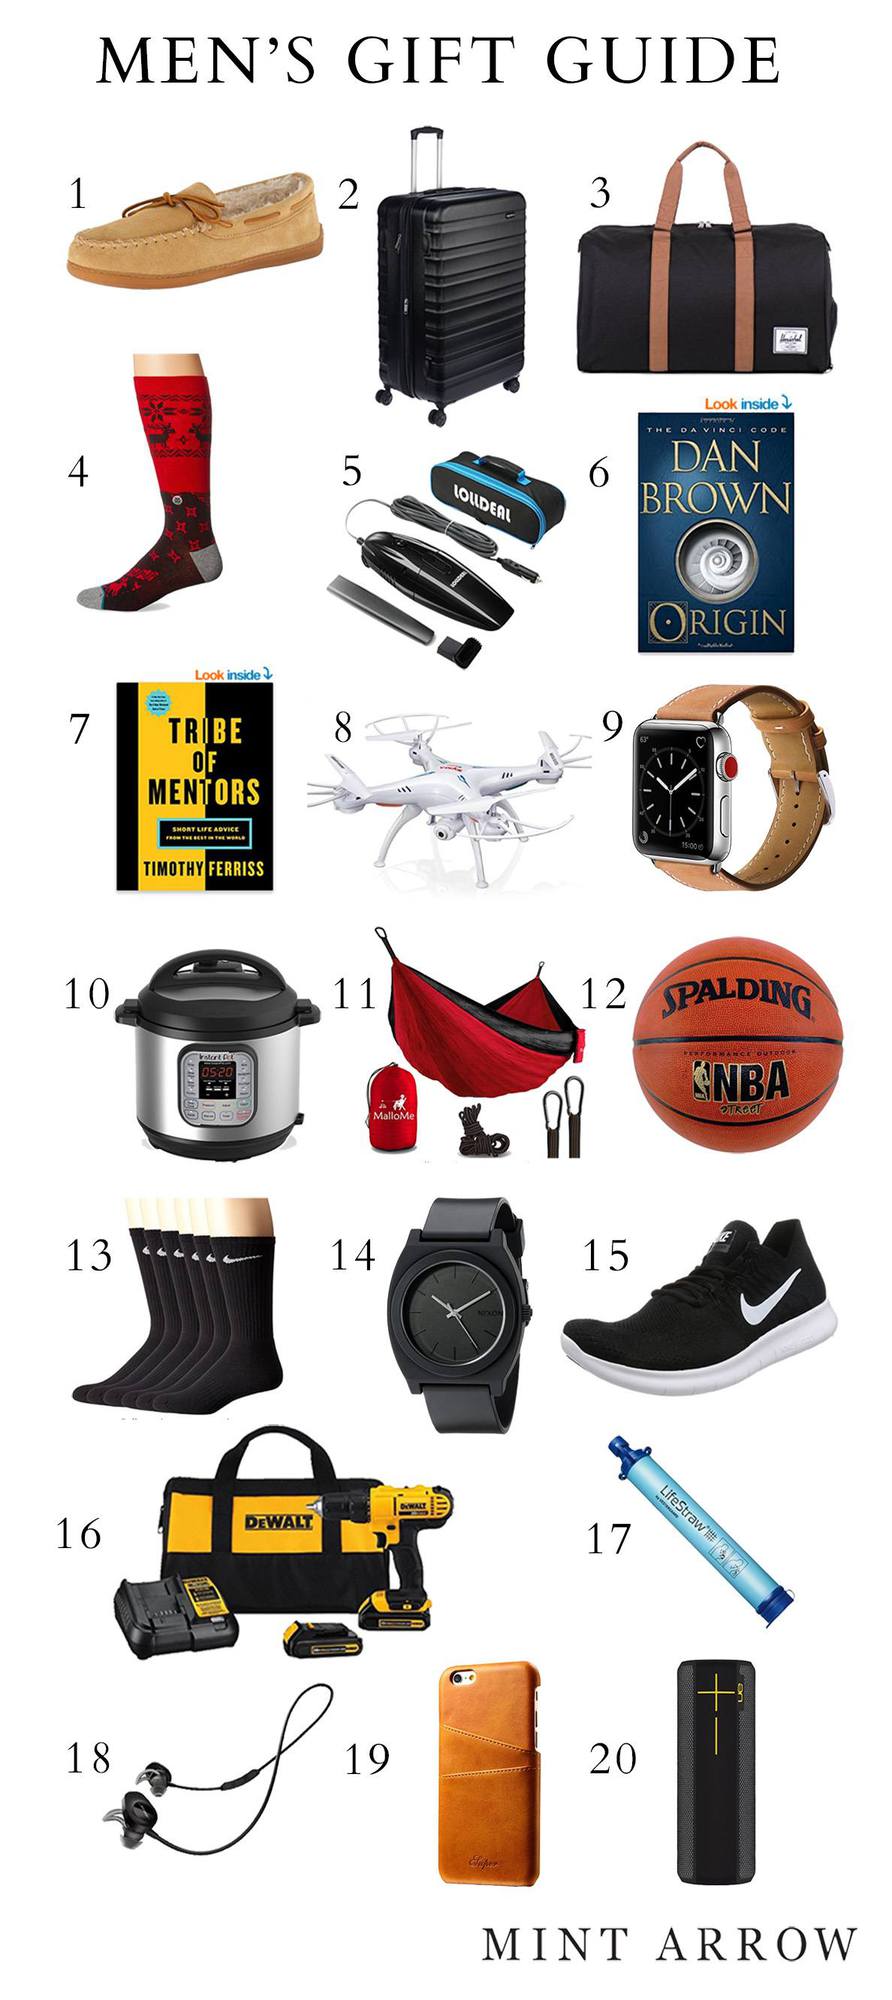 The ultimate stocking stuffer gift guide for men and women! - Mint Arrow